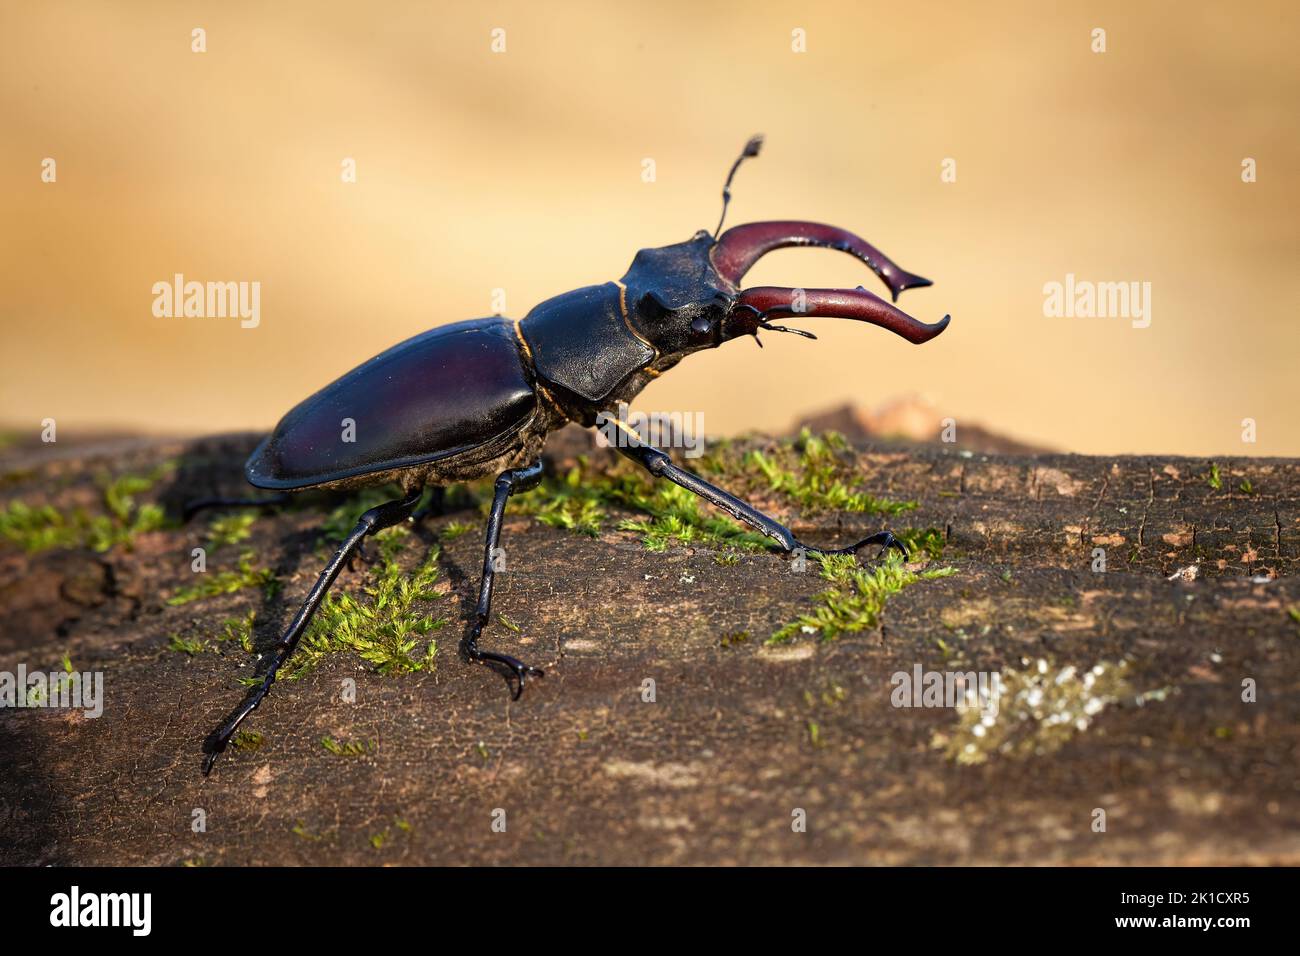 Male stag beetle crawling on branch in autumn forest. Stock Photo